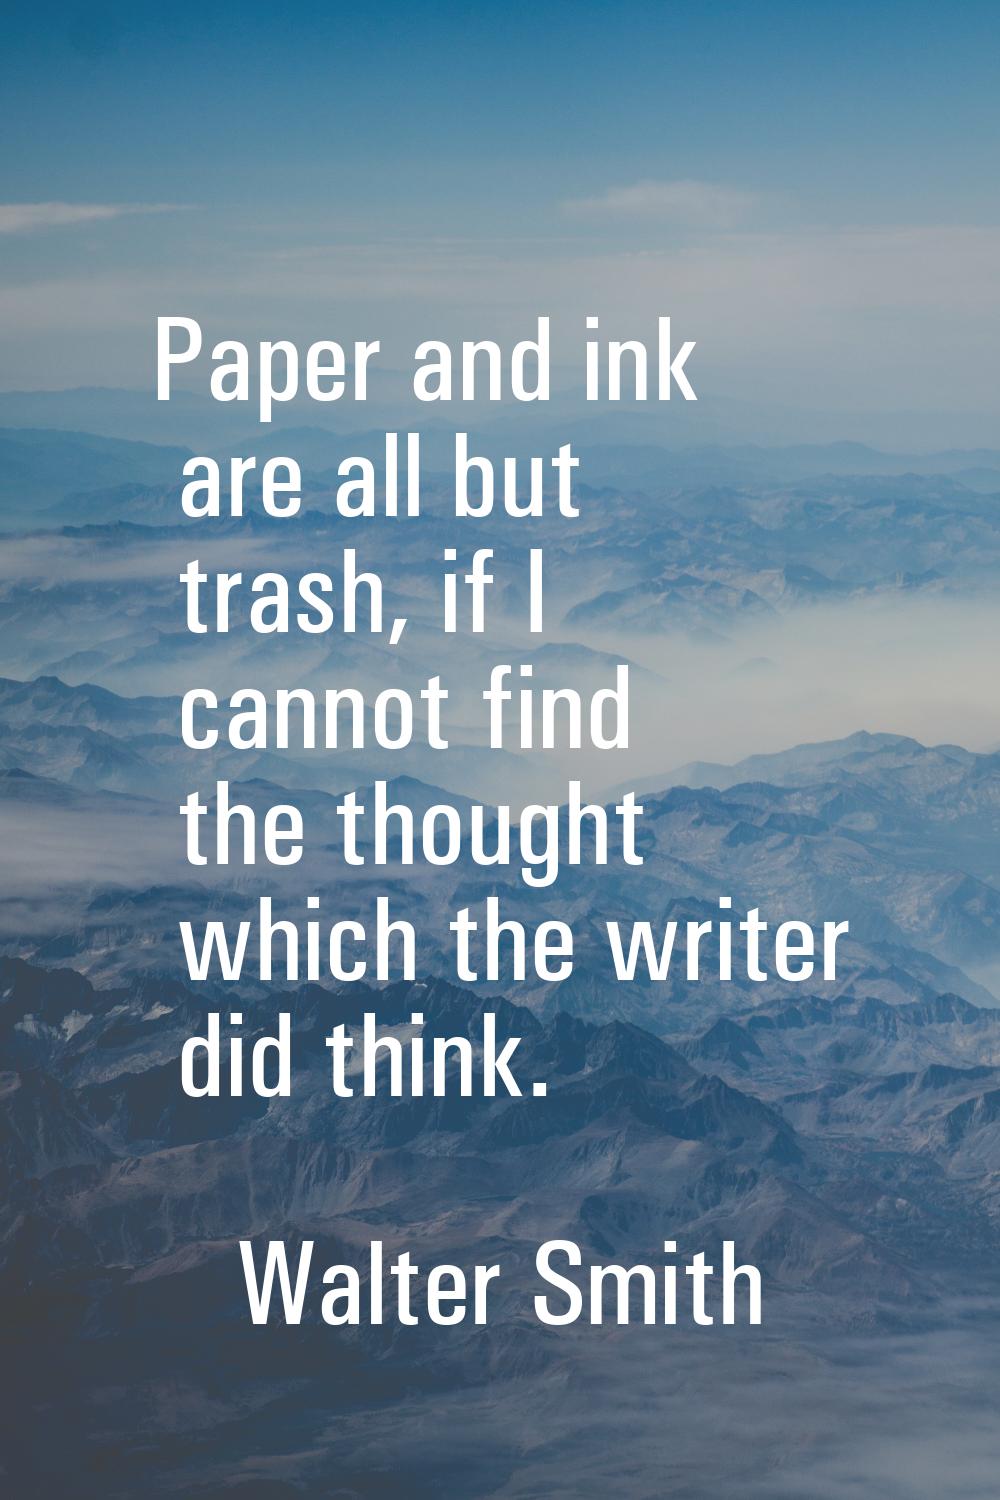 Paper and ink are all but trash, if I cannot find the thought which the writer did think.